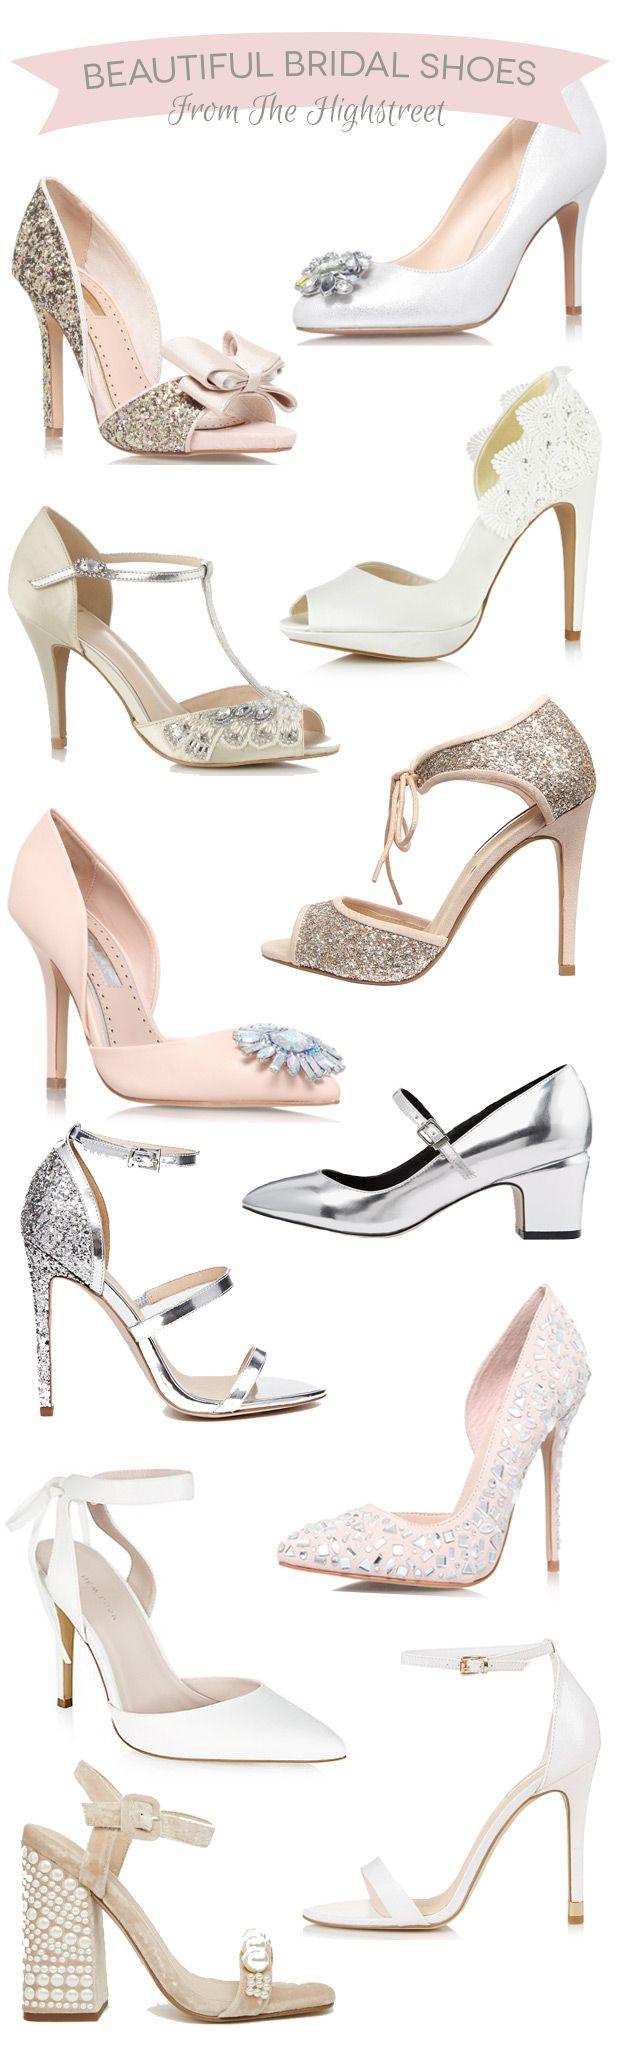 Hochzeit - Wedding Shoes On A Budget (but Look A Million Dollars!)